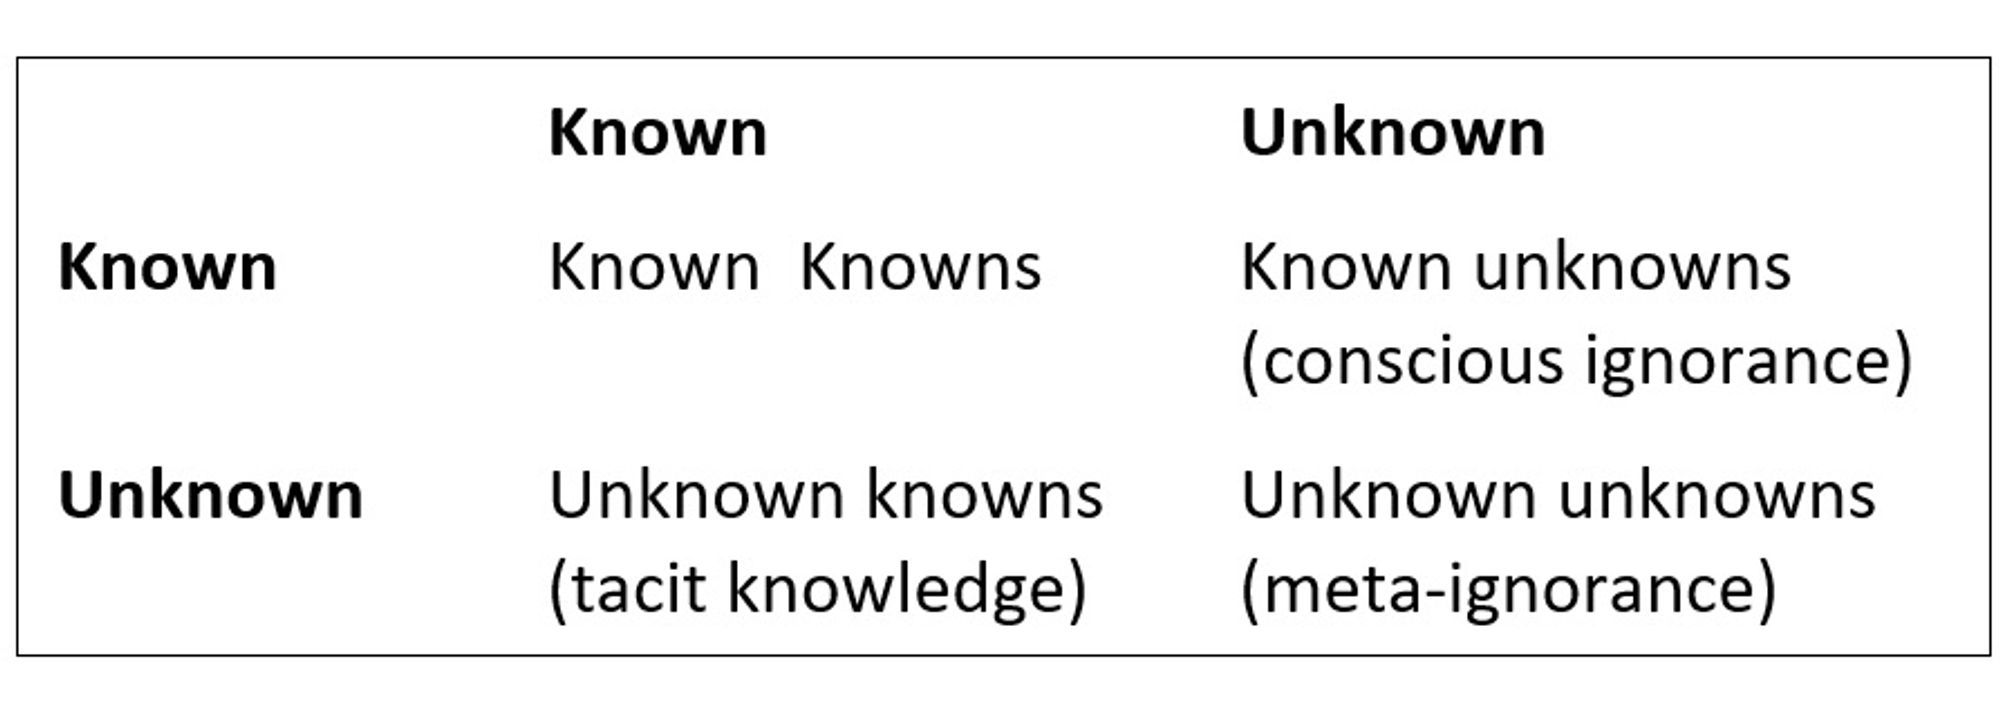 We Don’t Know What We Don’t Know: Exploring the Johari Window